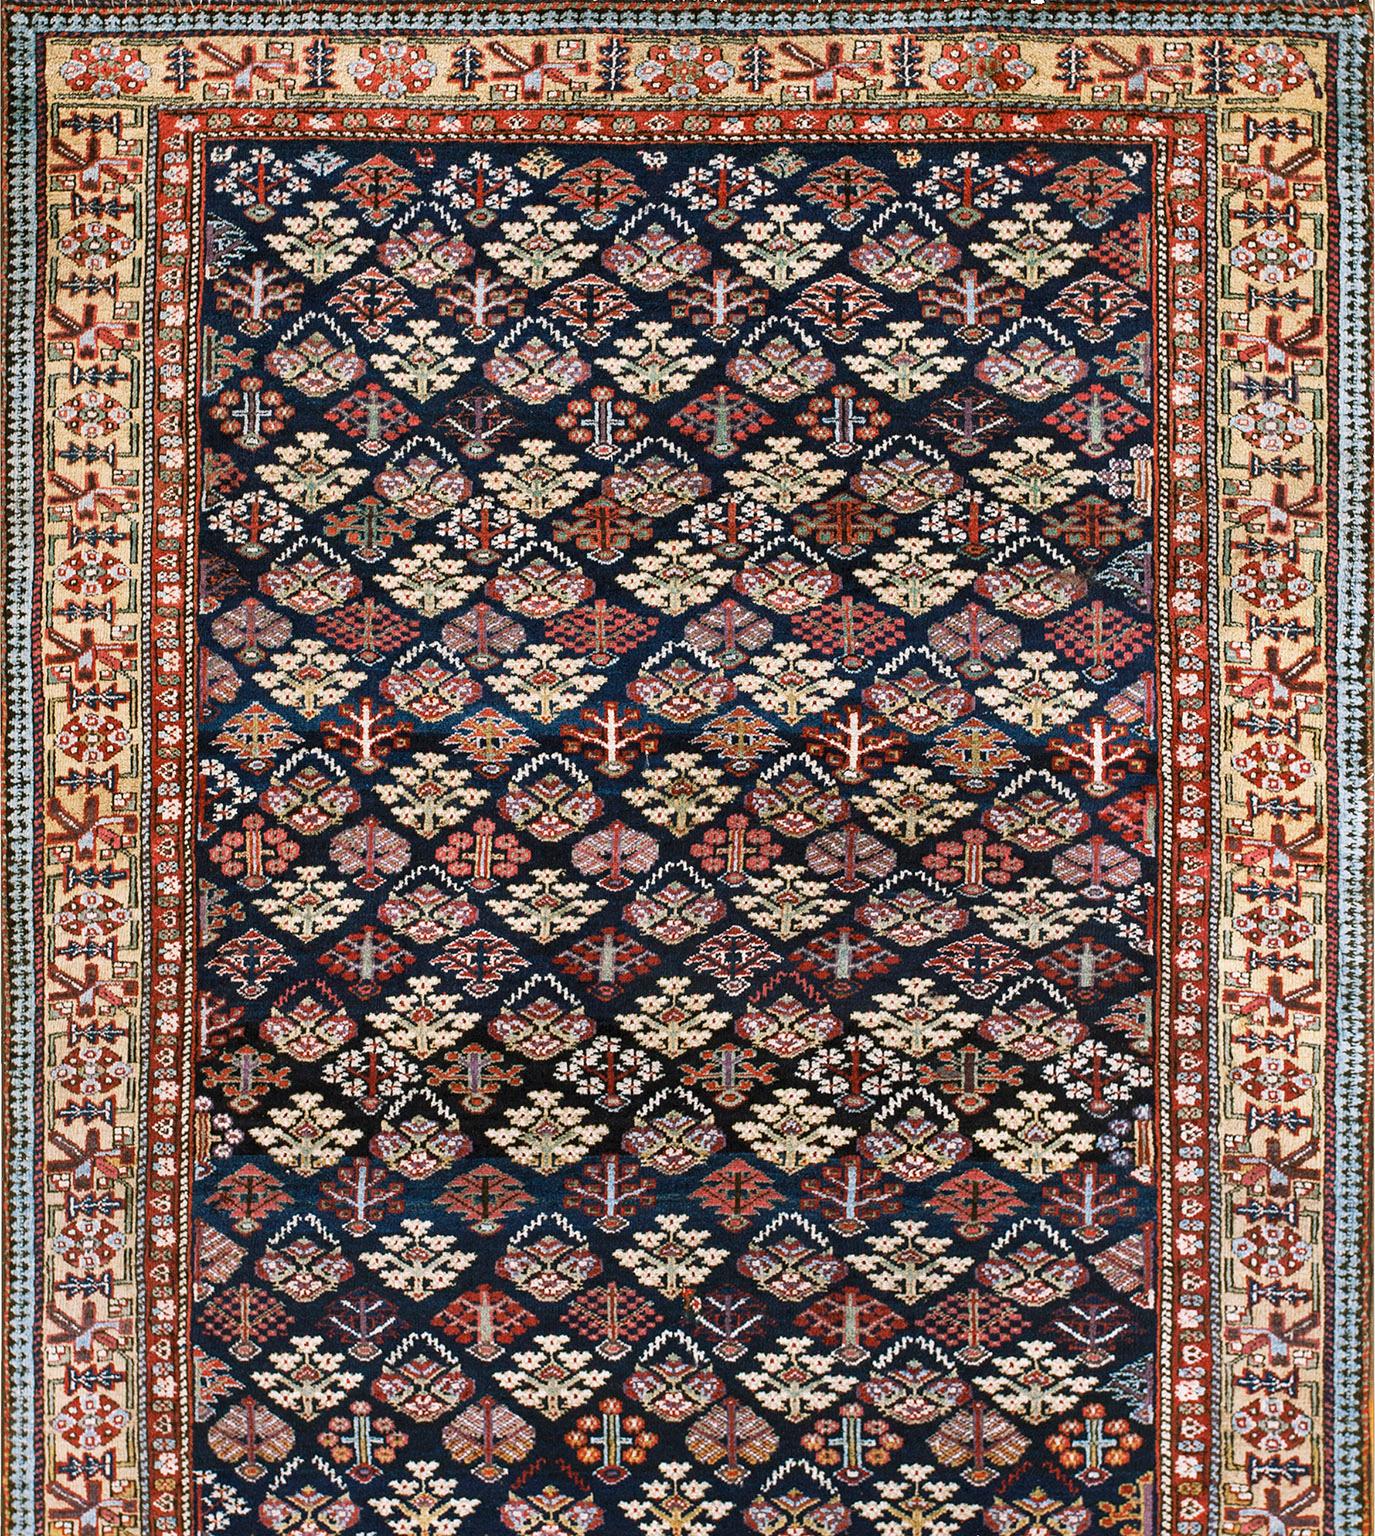 Handmade antique NW Persian carpet. Woven, circa 1860, (mid-19th century). Persian informal rug, wide runner size: 5'7